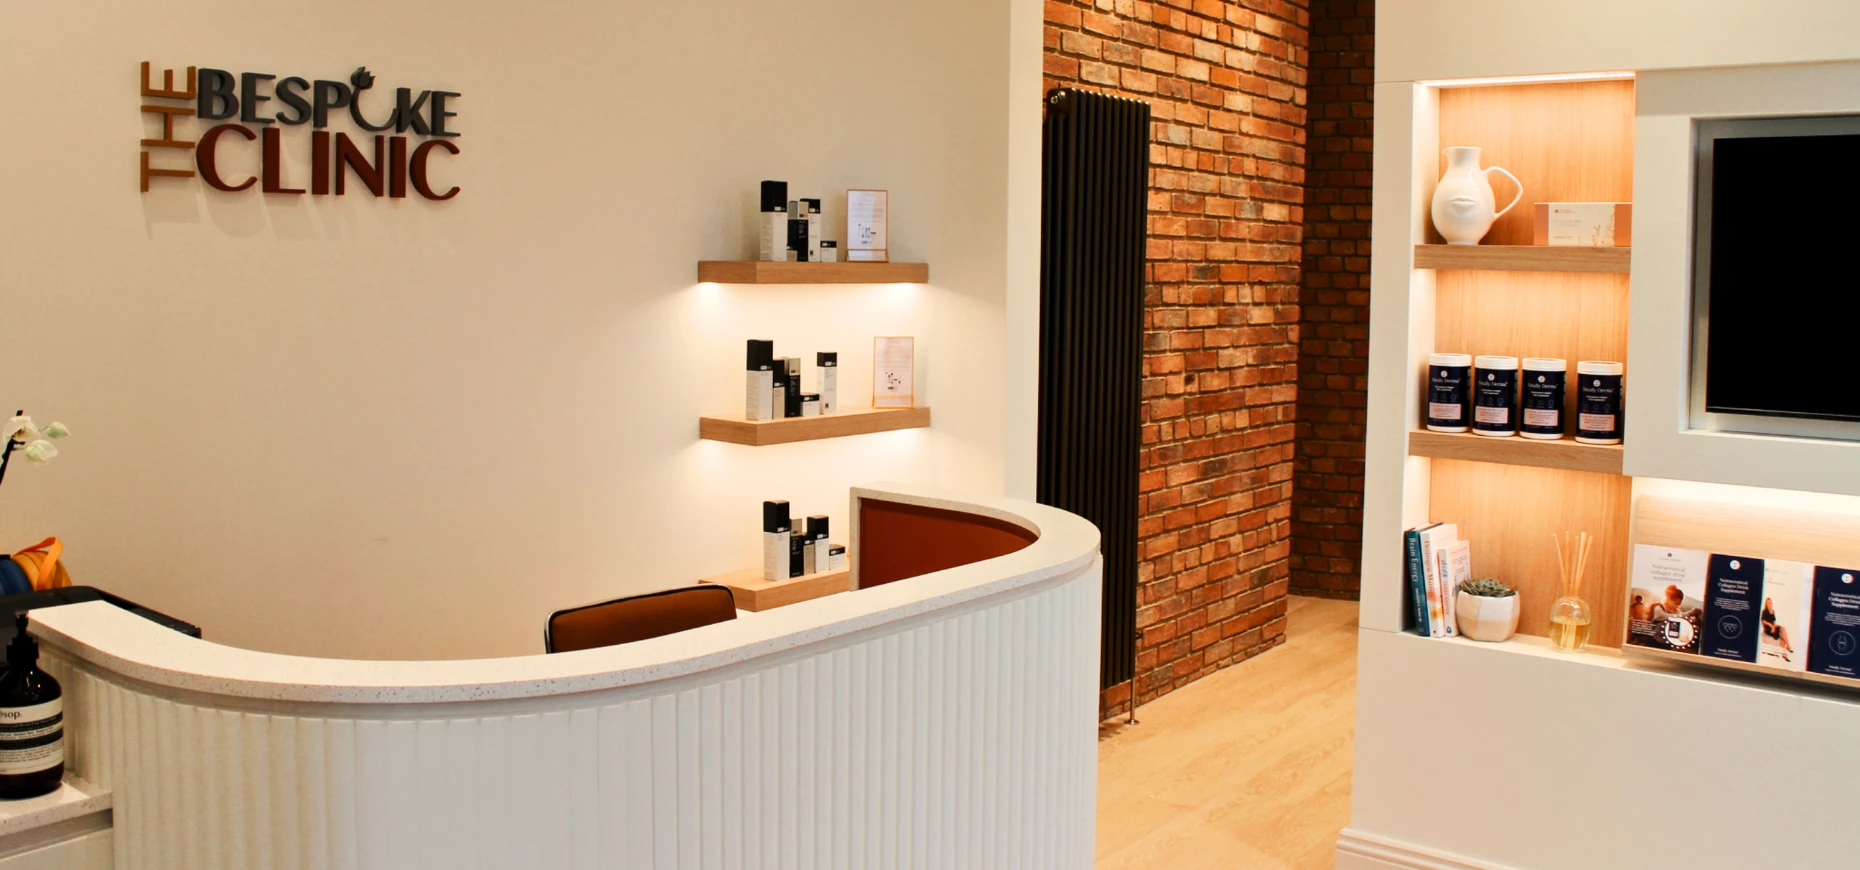 The reception desk at The Bespoke Clinic, located on Osborne Road in Jesmond.